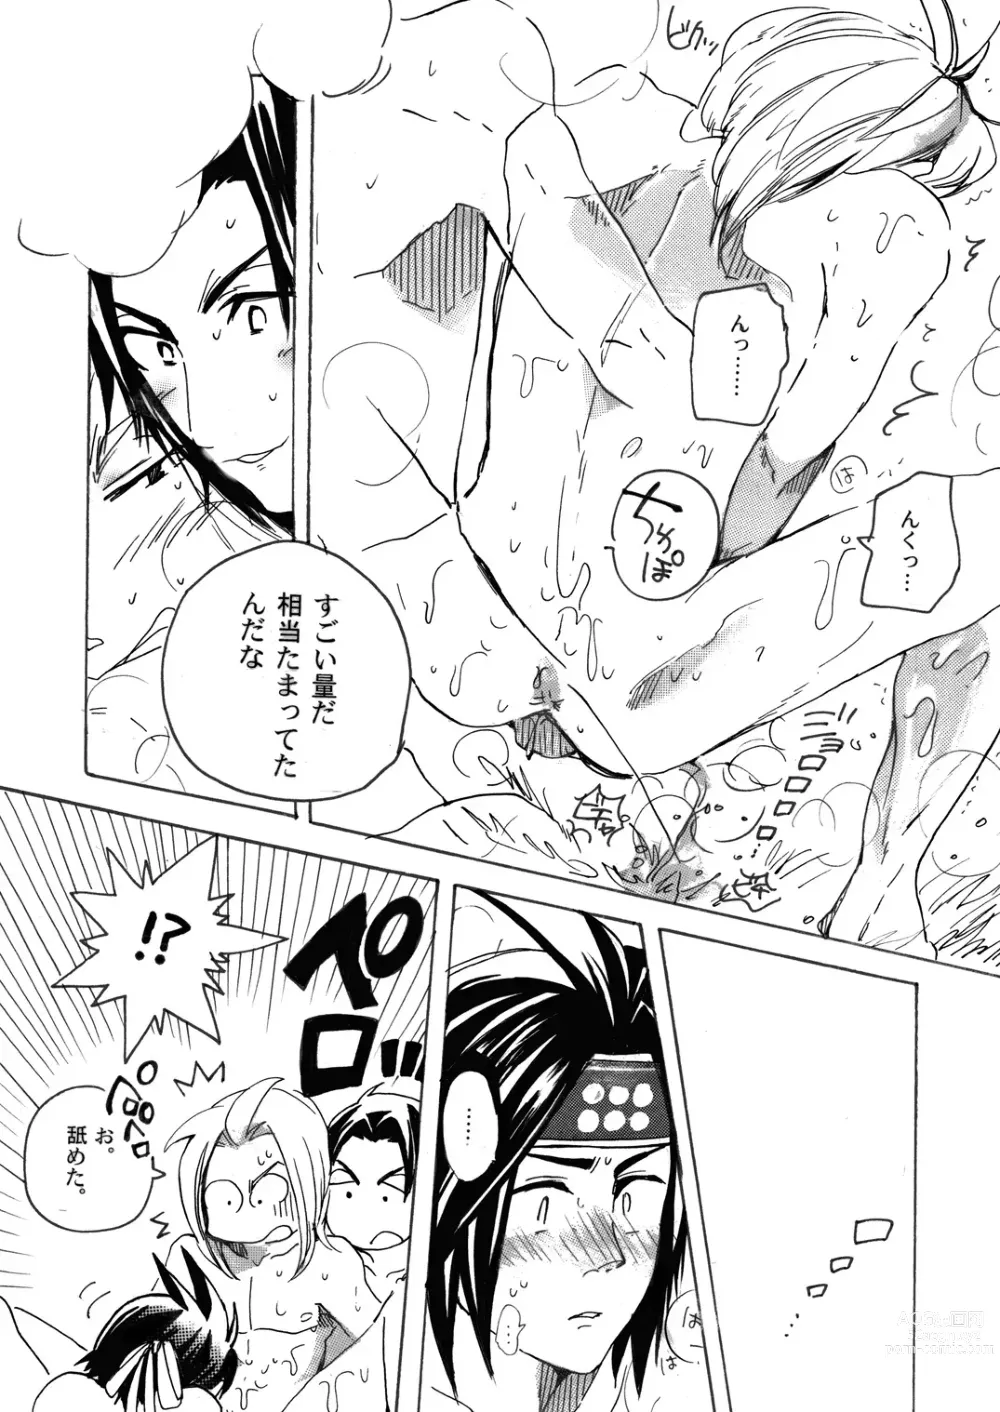 Page 23 of doujinshi MANIACCESS